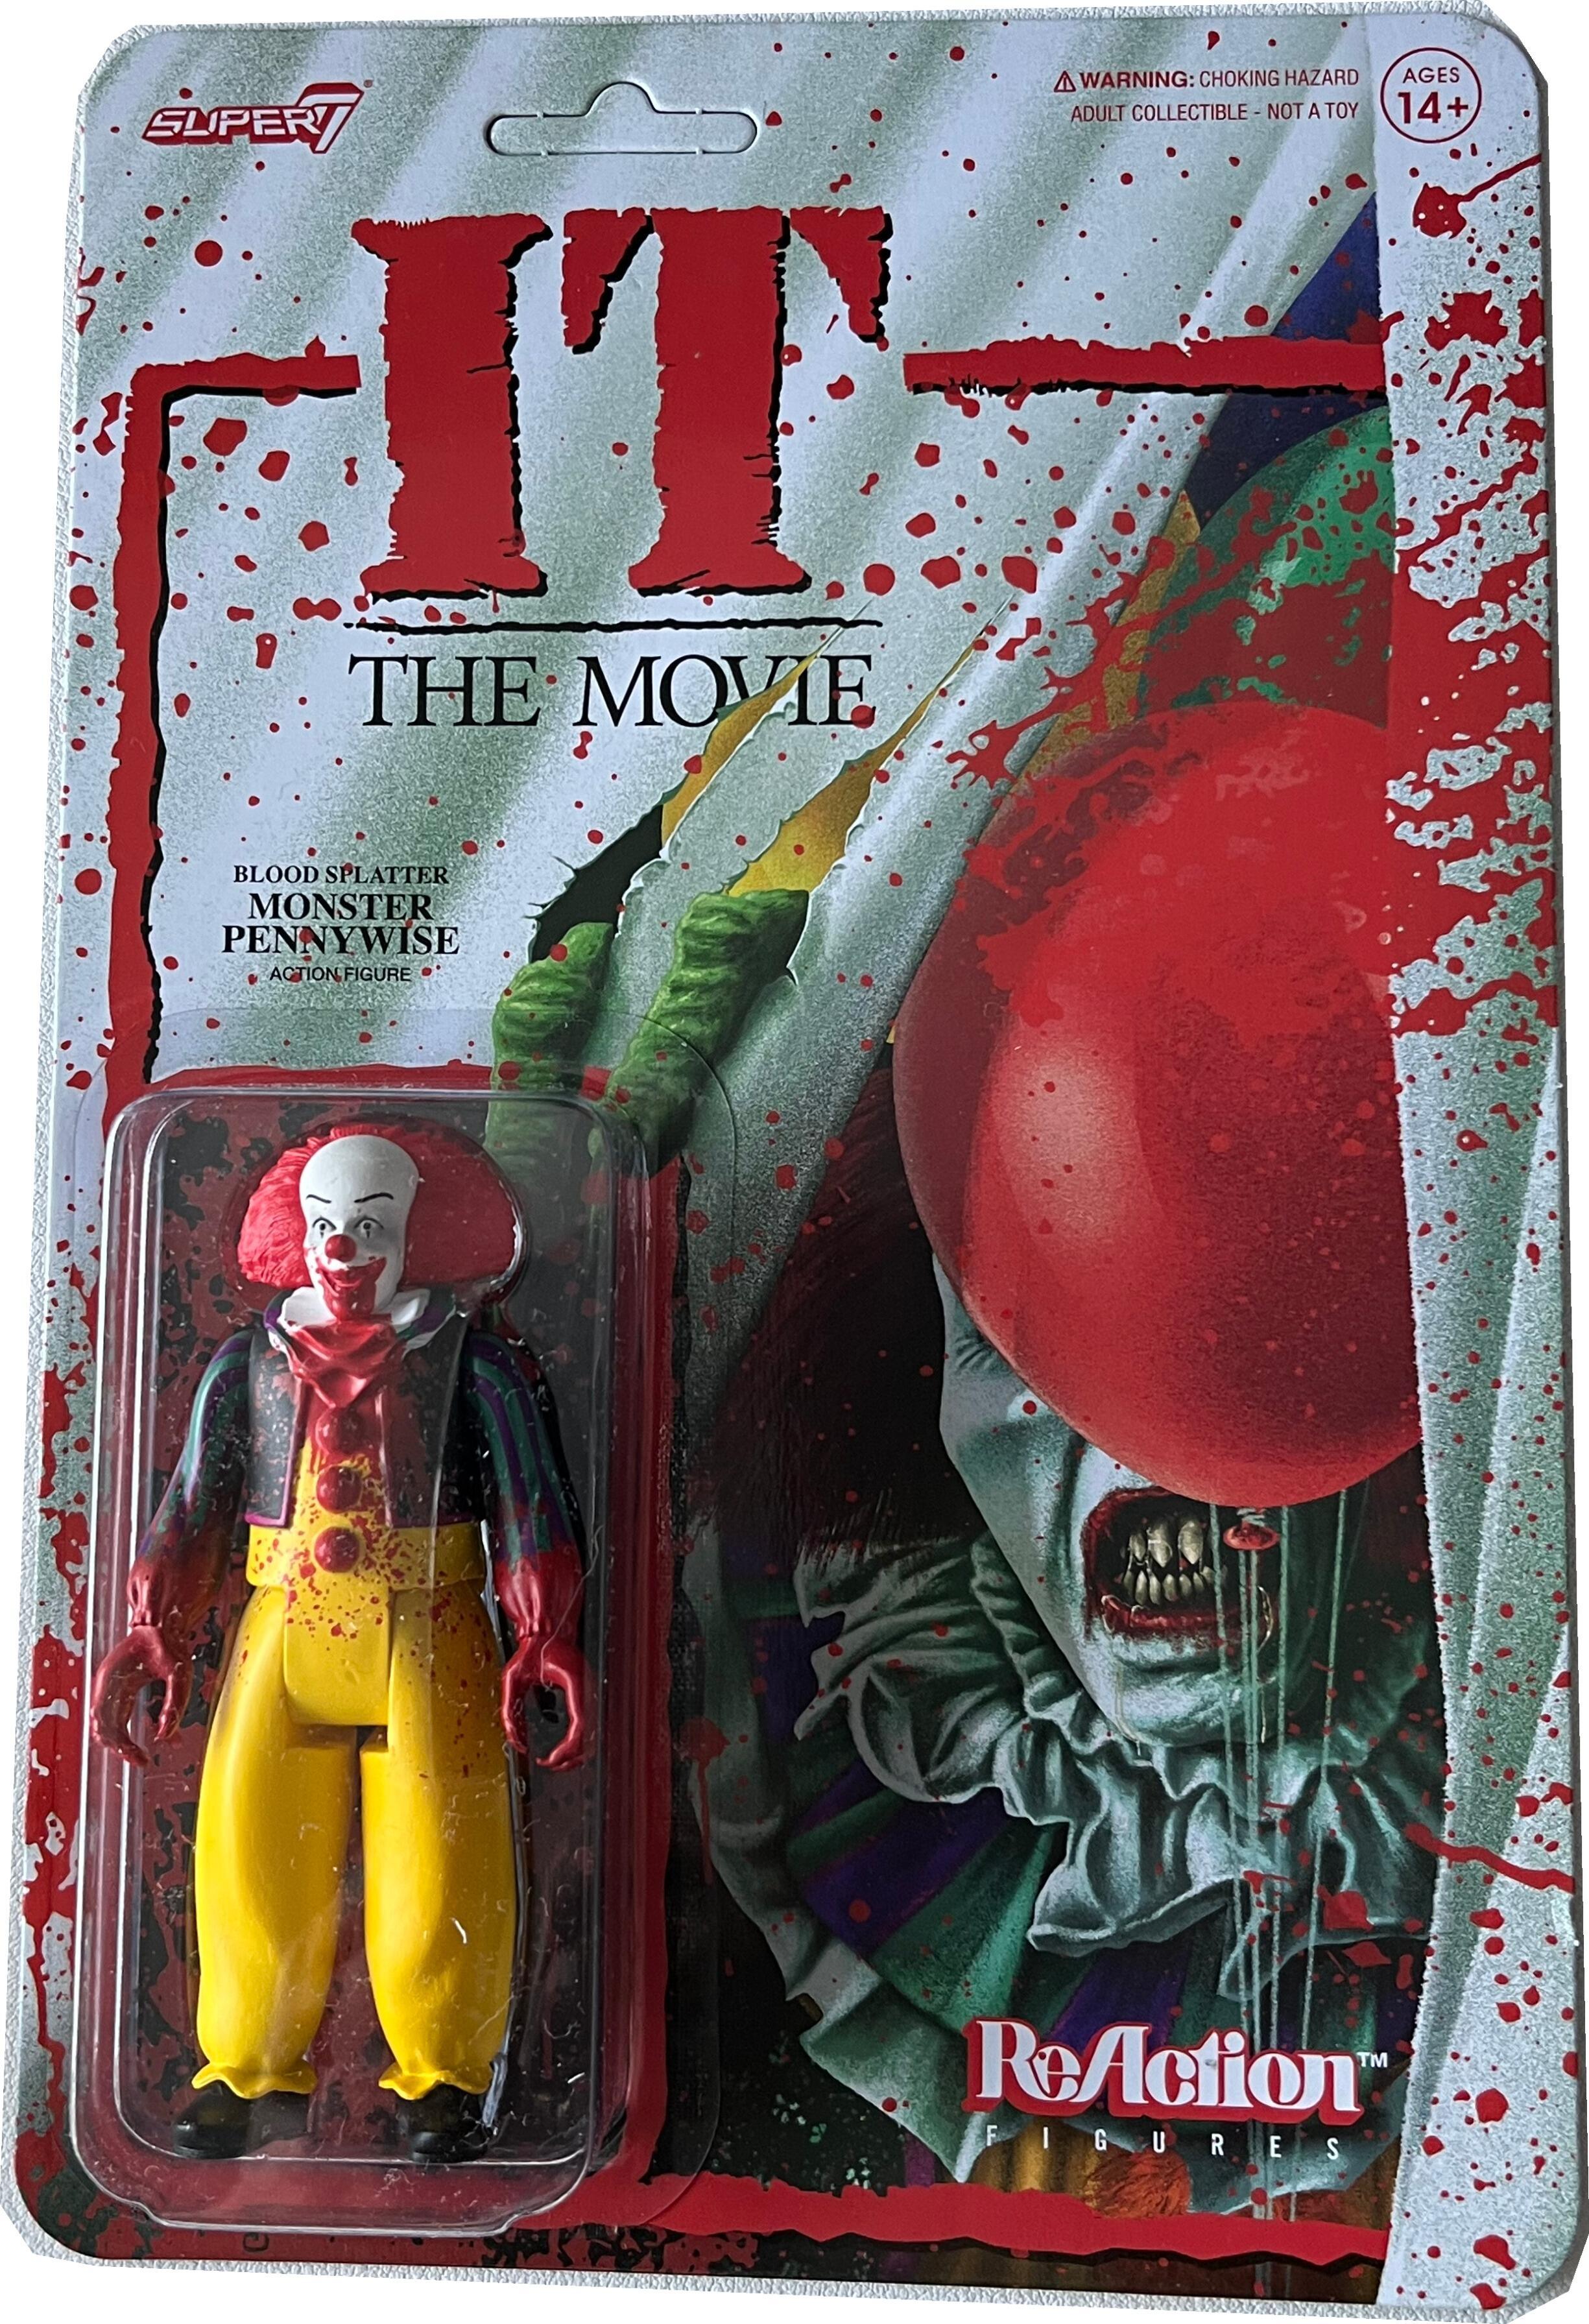 IT Monster Pennywise - Blood Splatter reaction figure from 'IT the Movie' made by super 7, SKITW02-MST-02